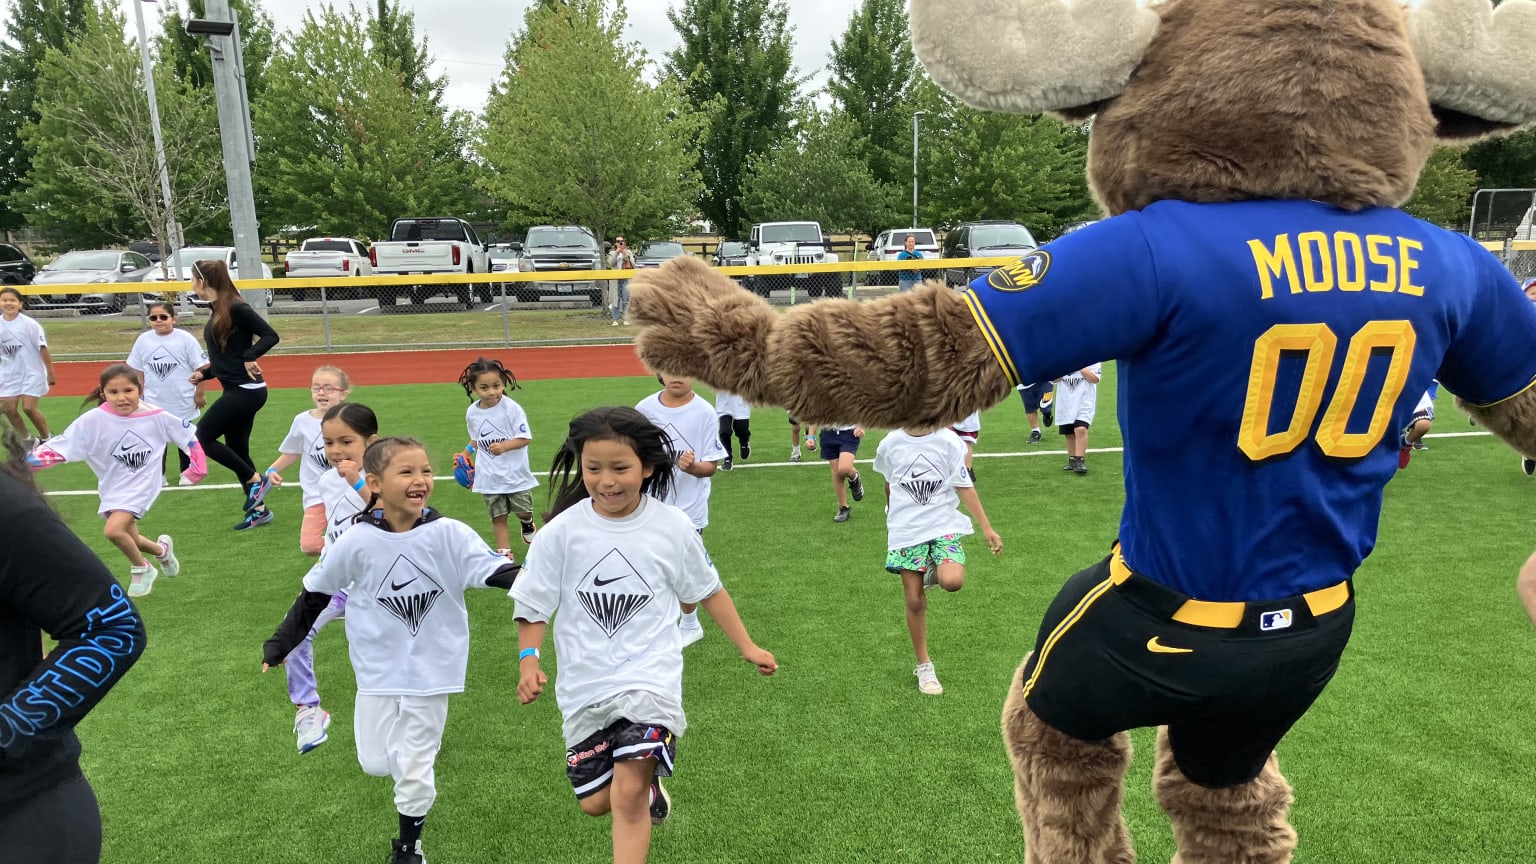 Children run and play with the Mariners mascot